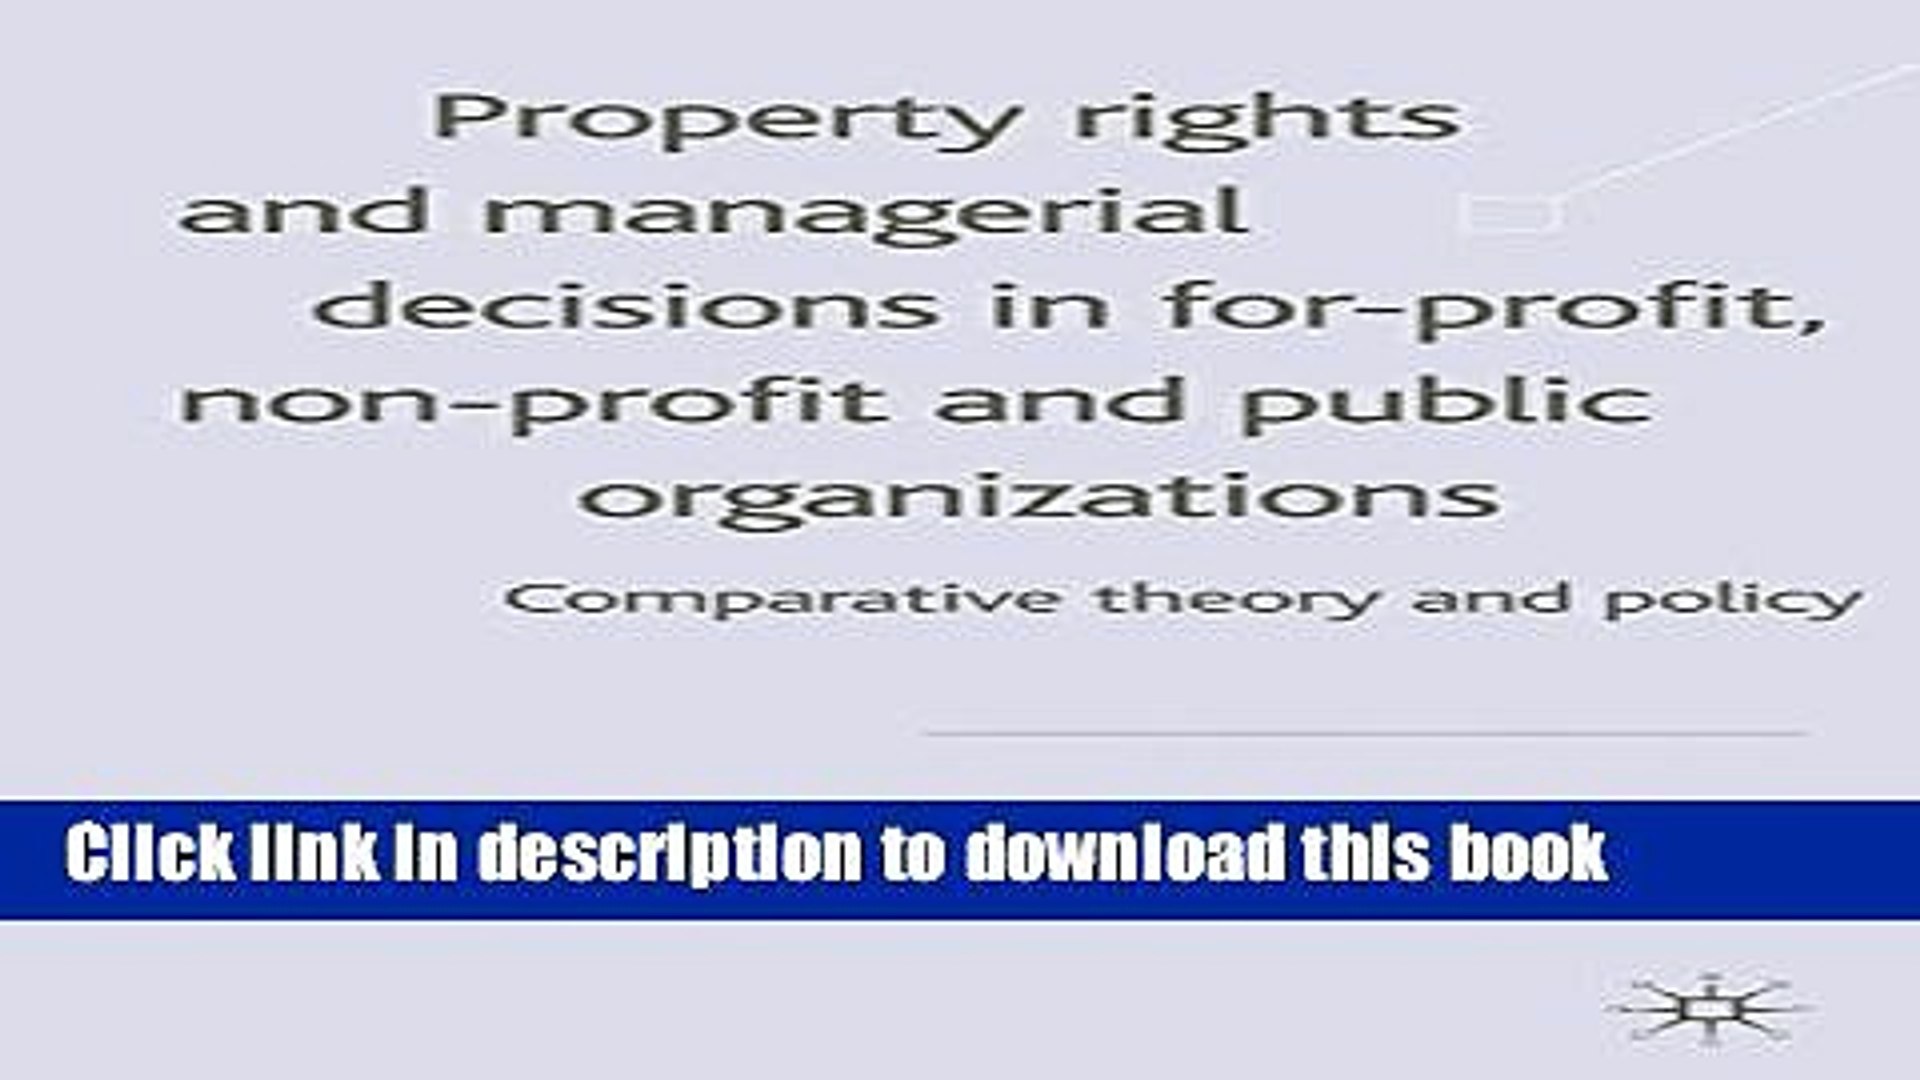 PDF  Property Rights and Managerial Decisions in For-profit, Non-profit and Public Organizations: